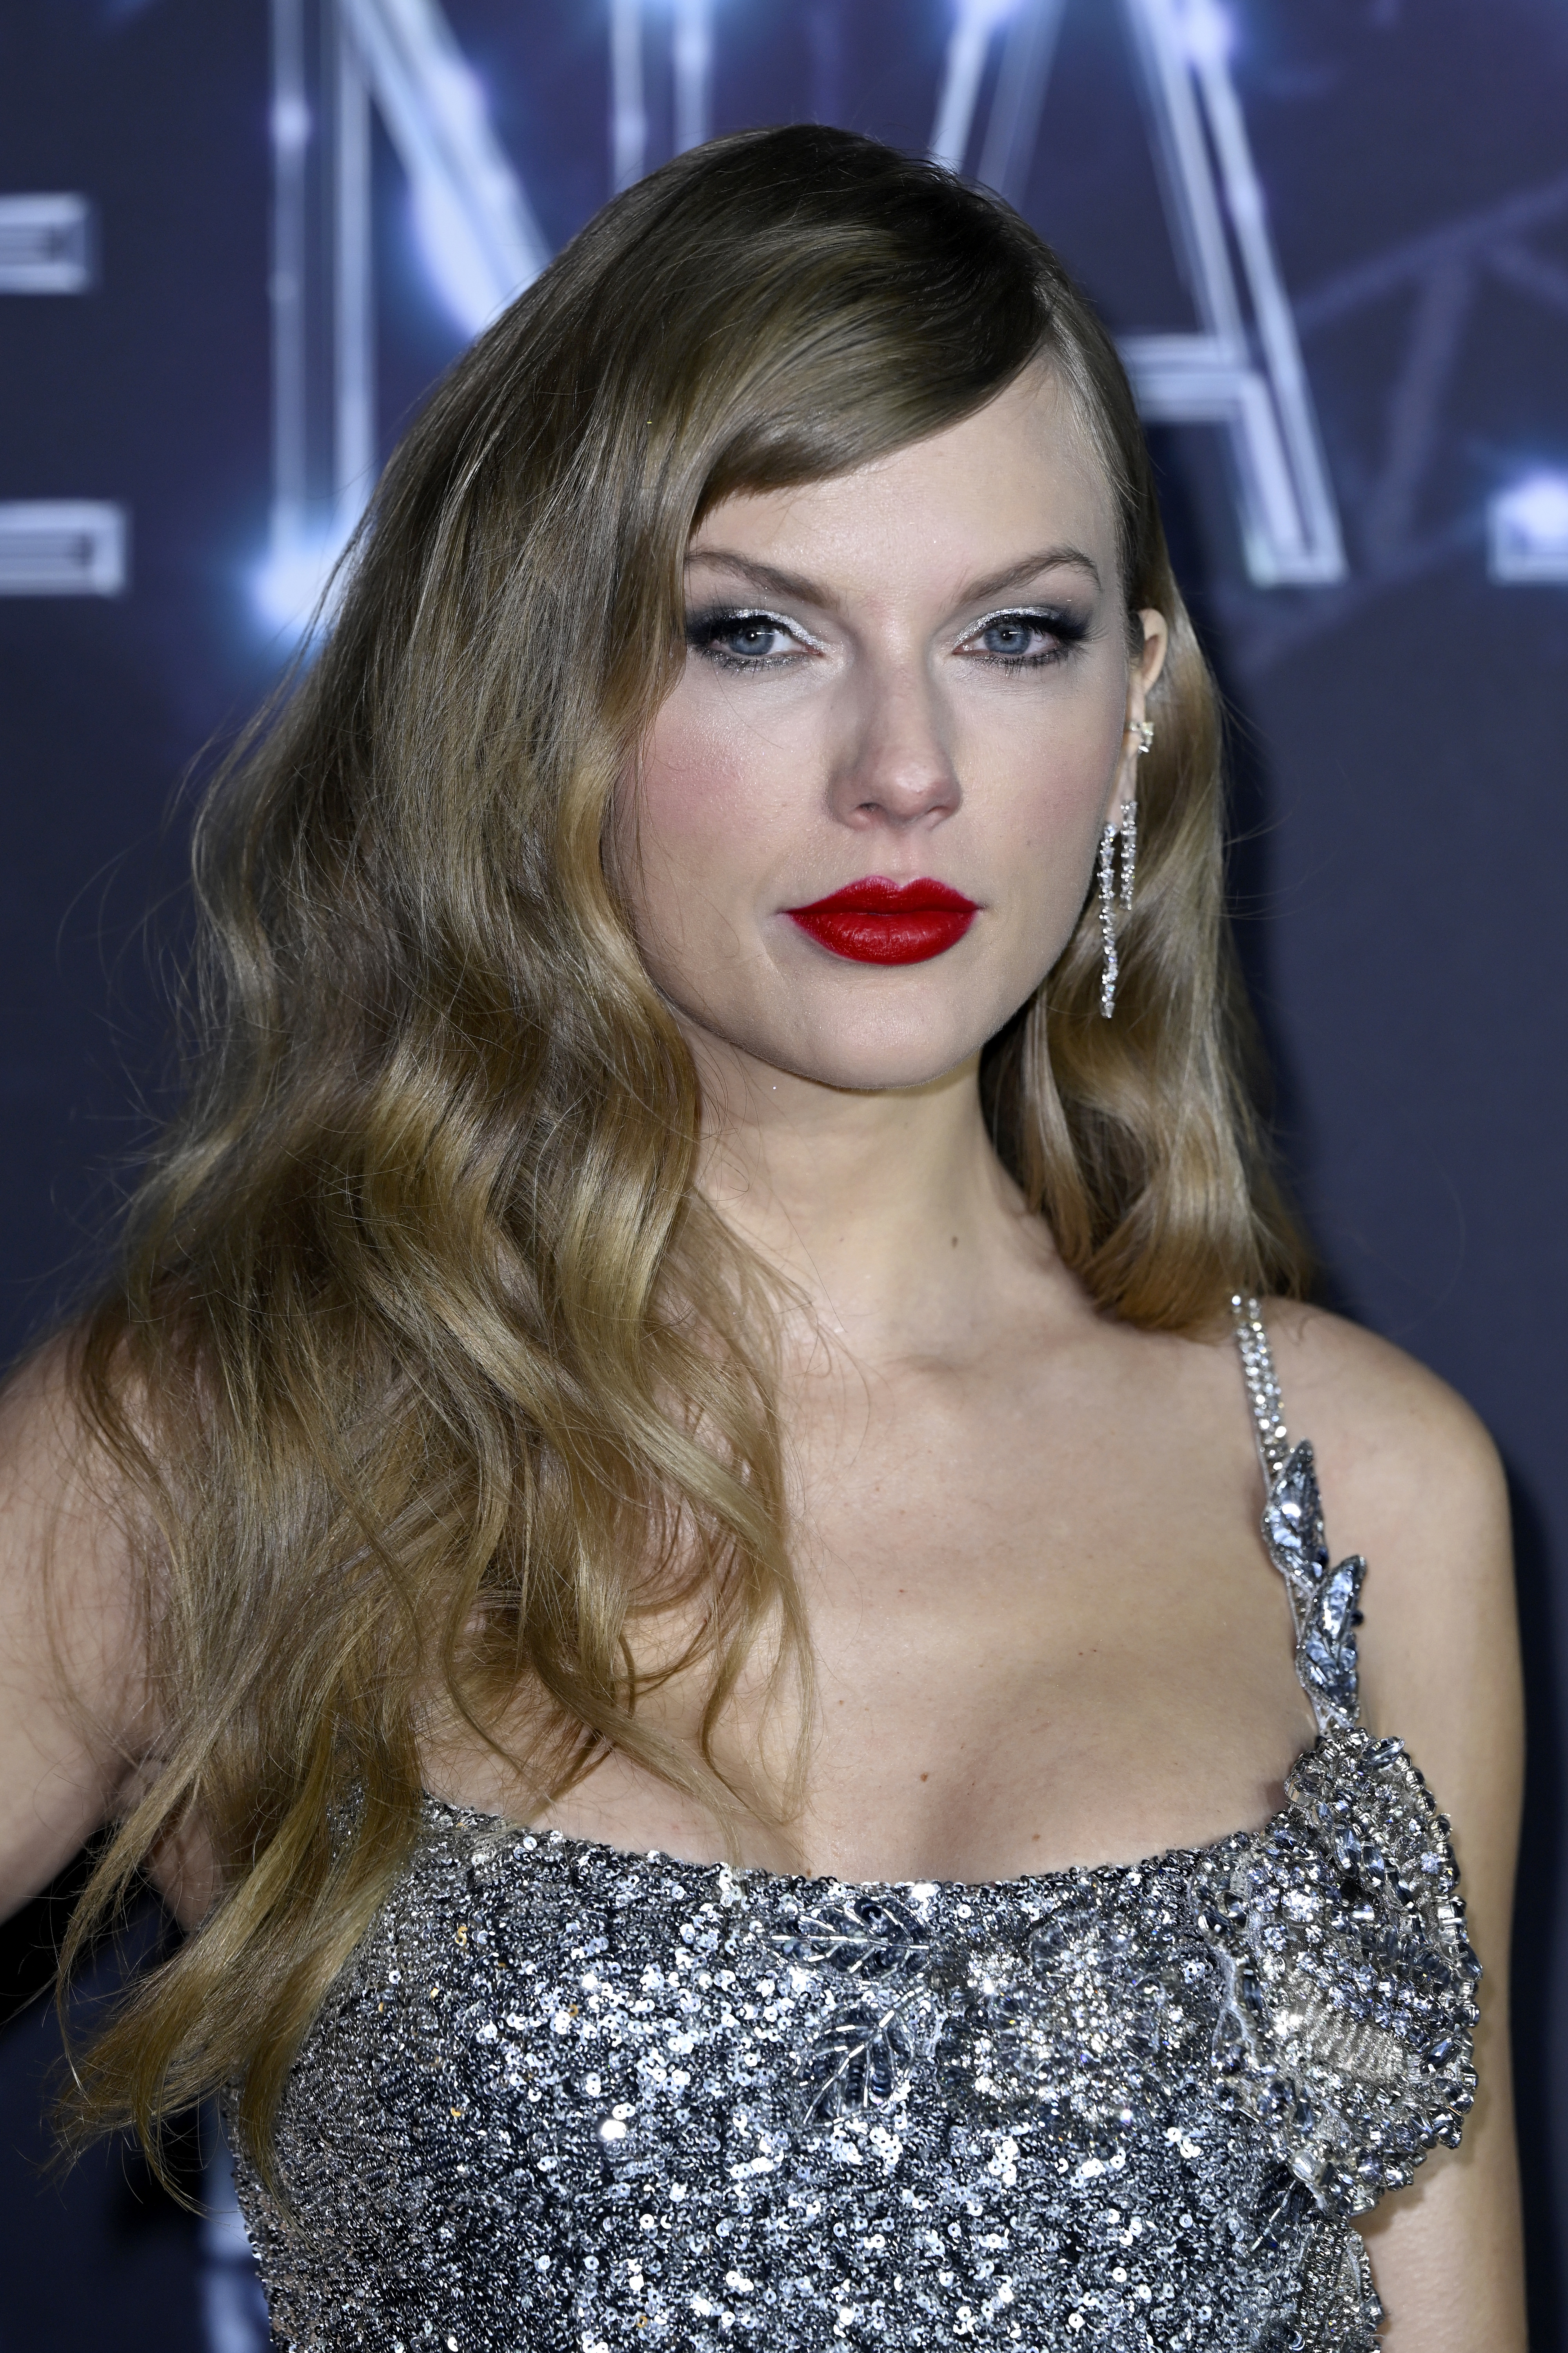 Close-up of Taylor in a bejeweled outfit at a media event